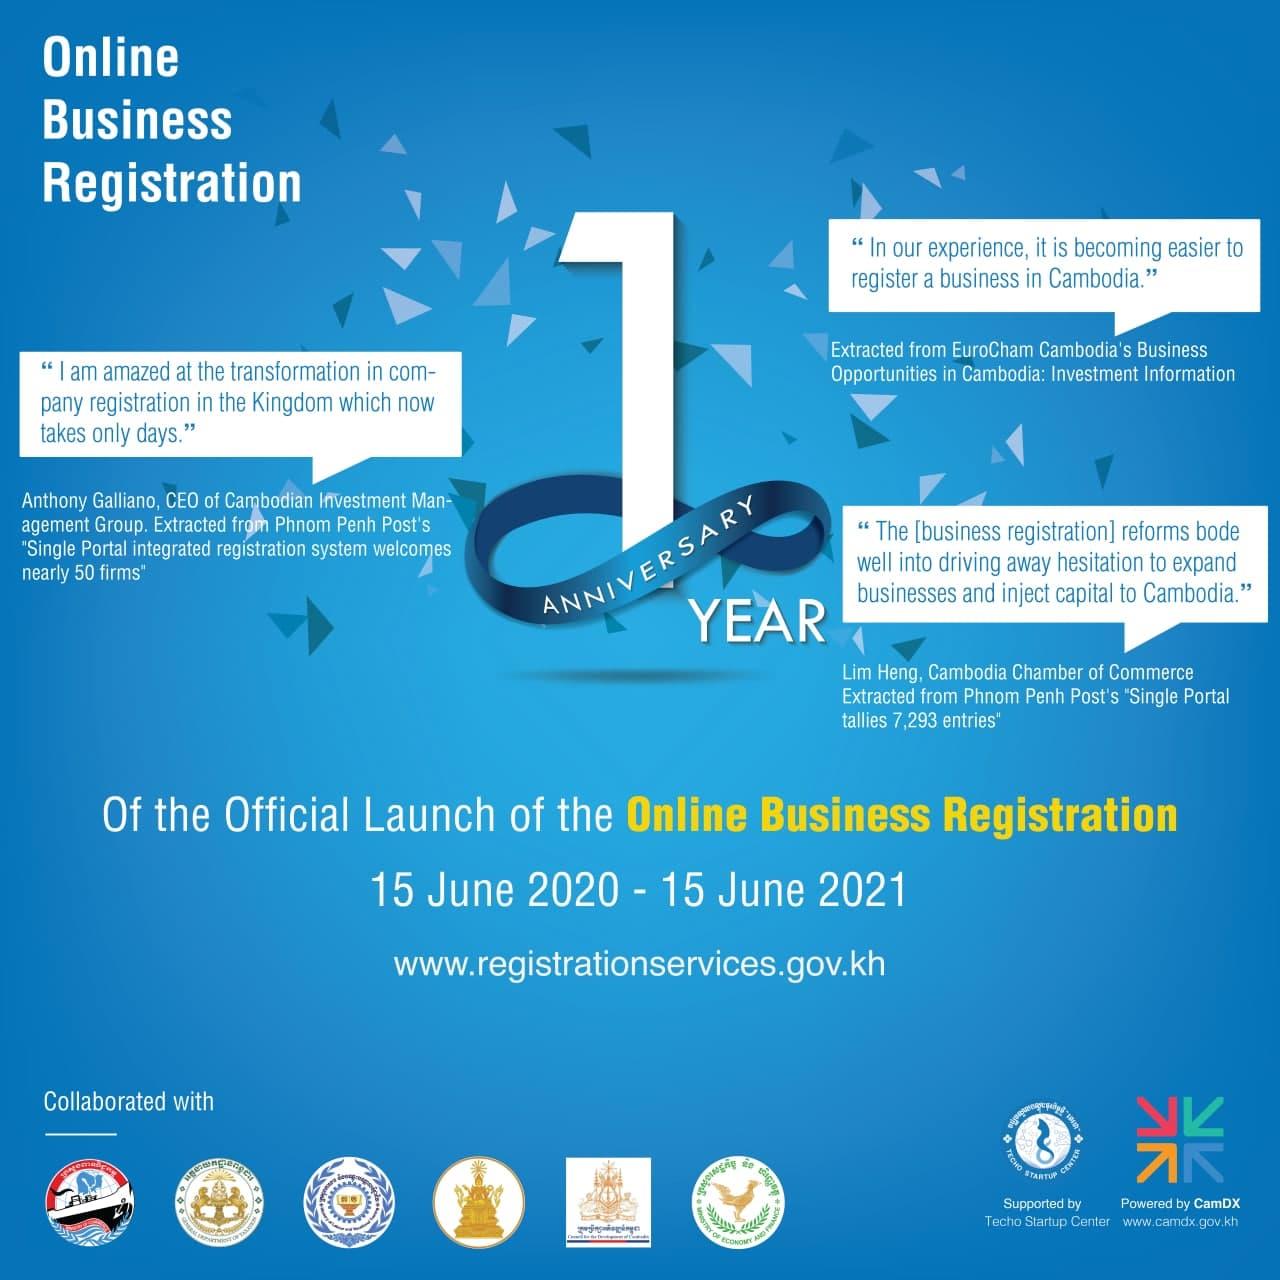 5 Most Selected Sectors and Invested in Cambodia on Online Business Registration Platform